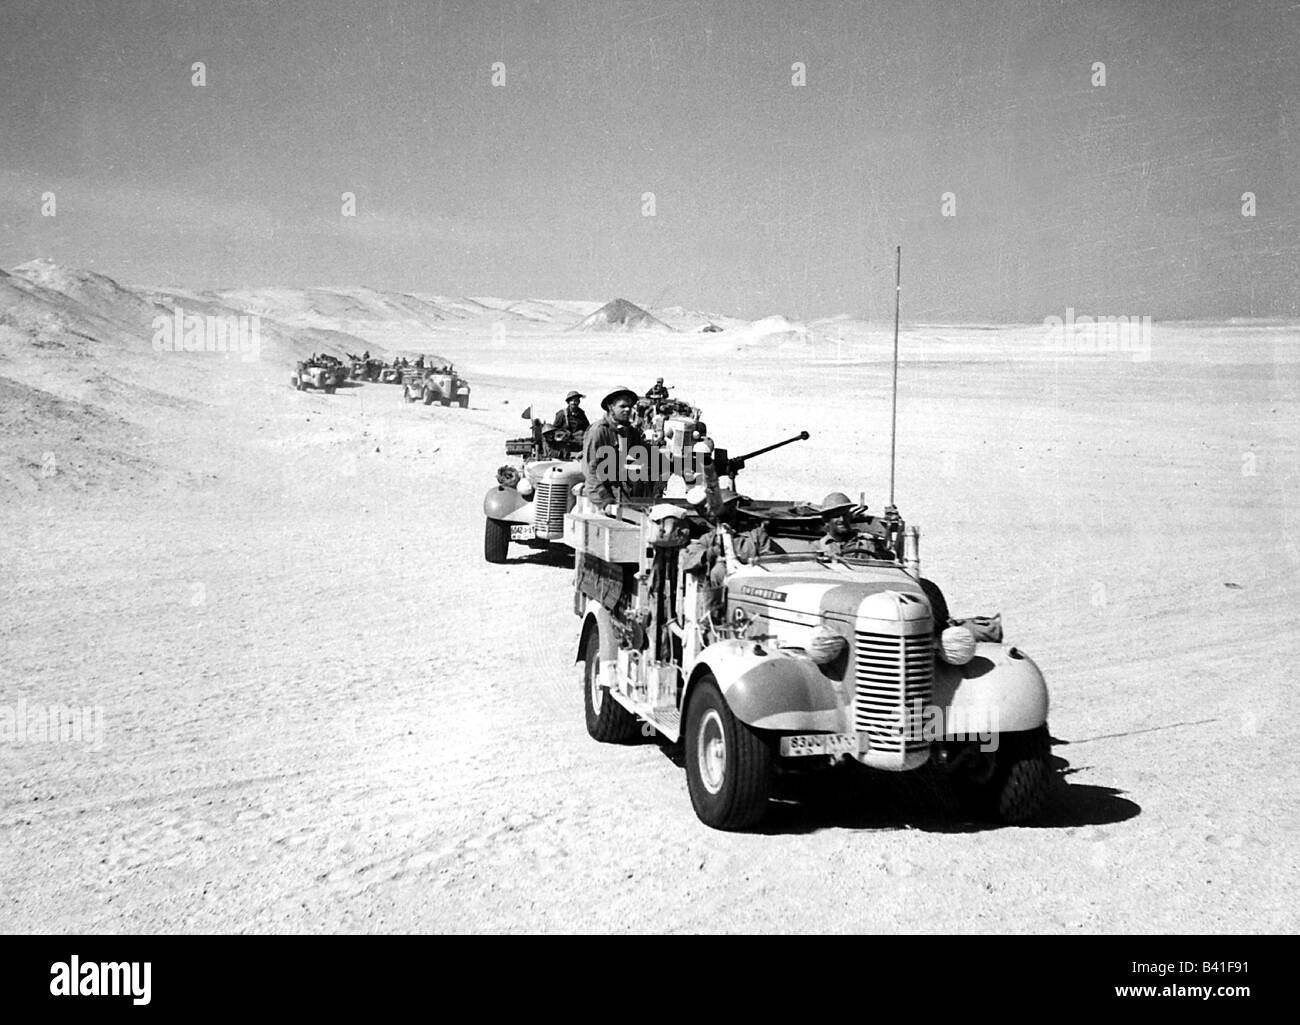 events, Second World War / WWII, North Africa, patrol of the British Long Range Desert Group (LRDG) in the Sahara, 27.3.1941, Stock Photo